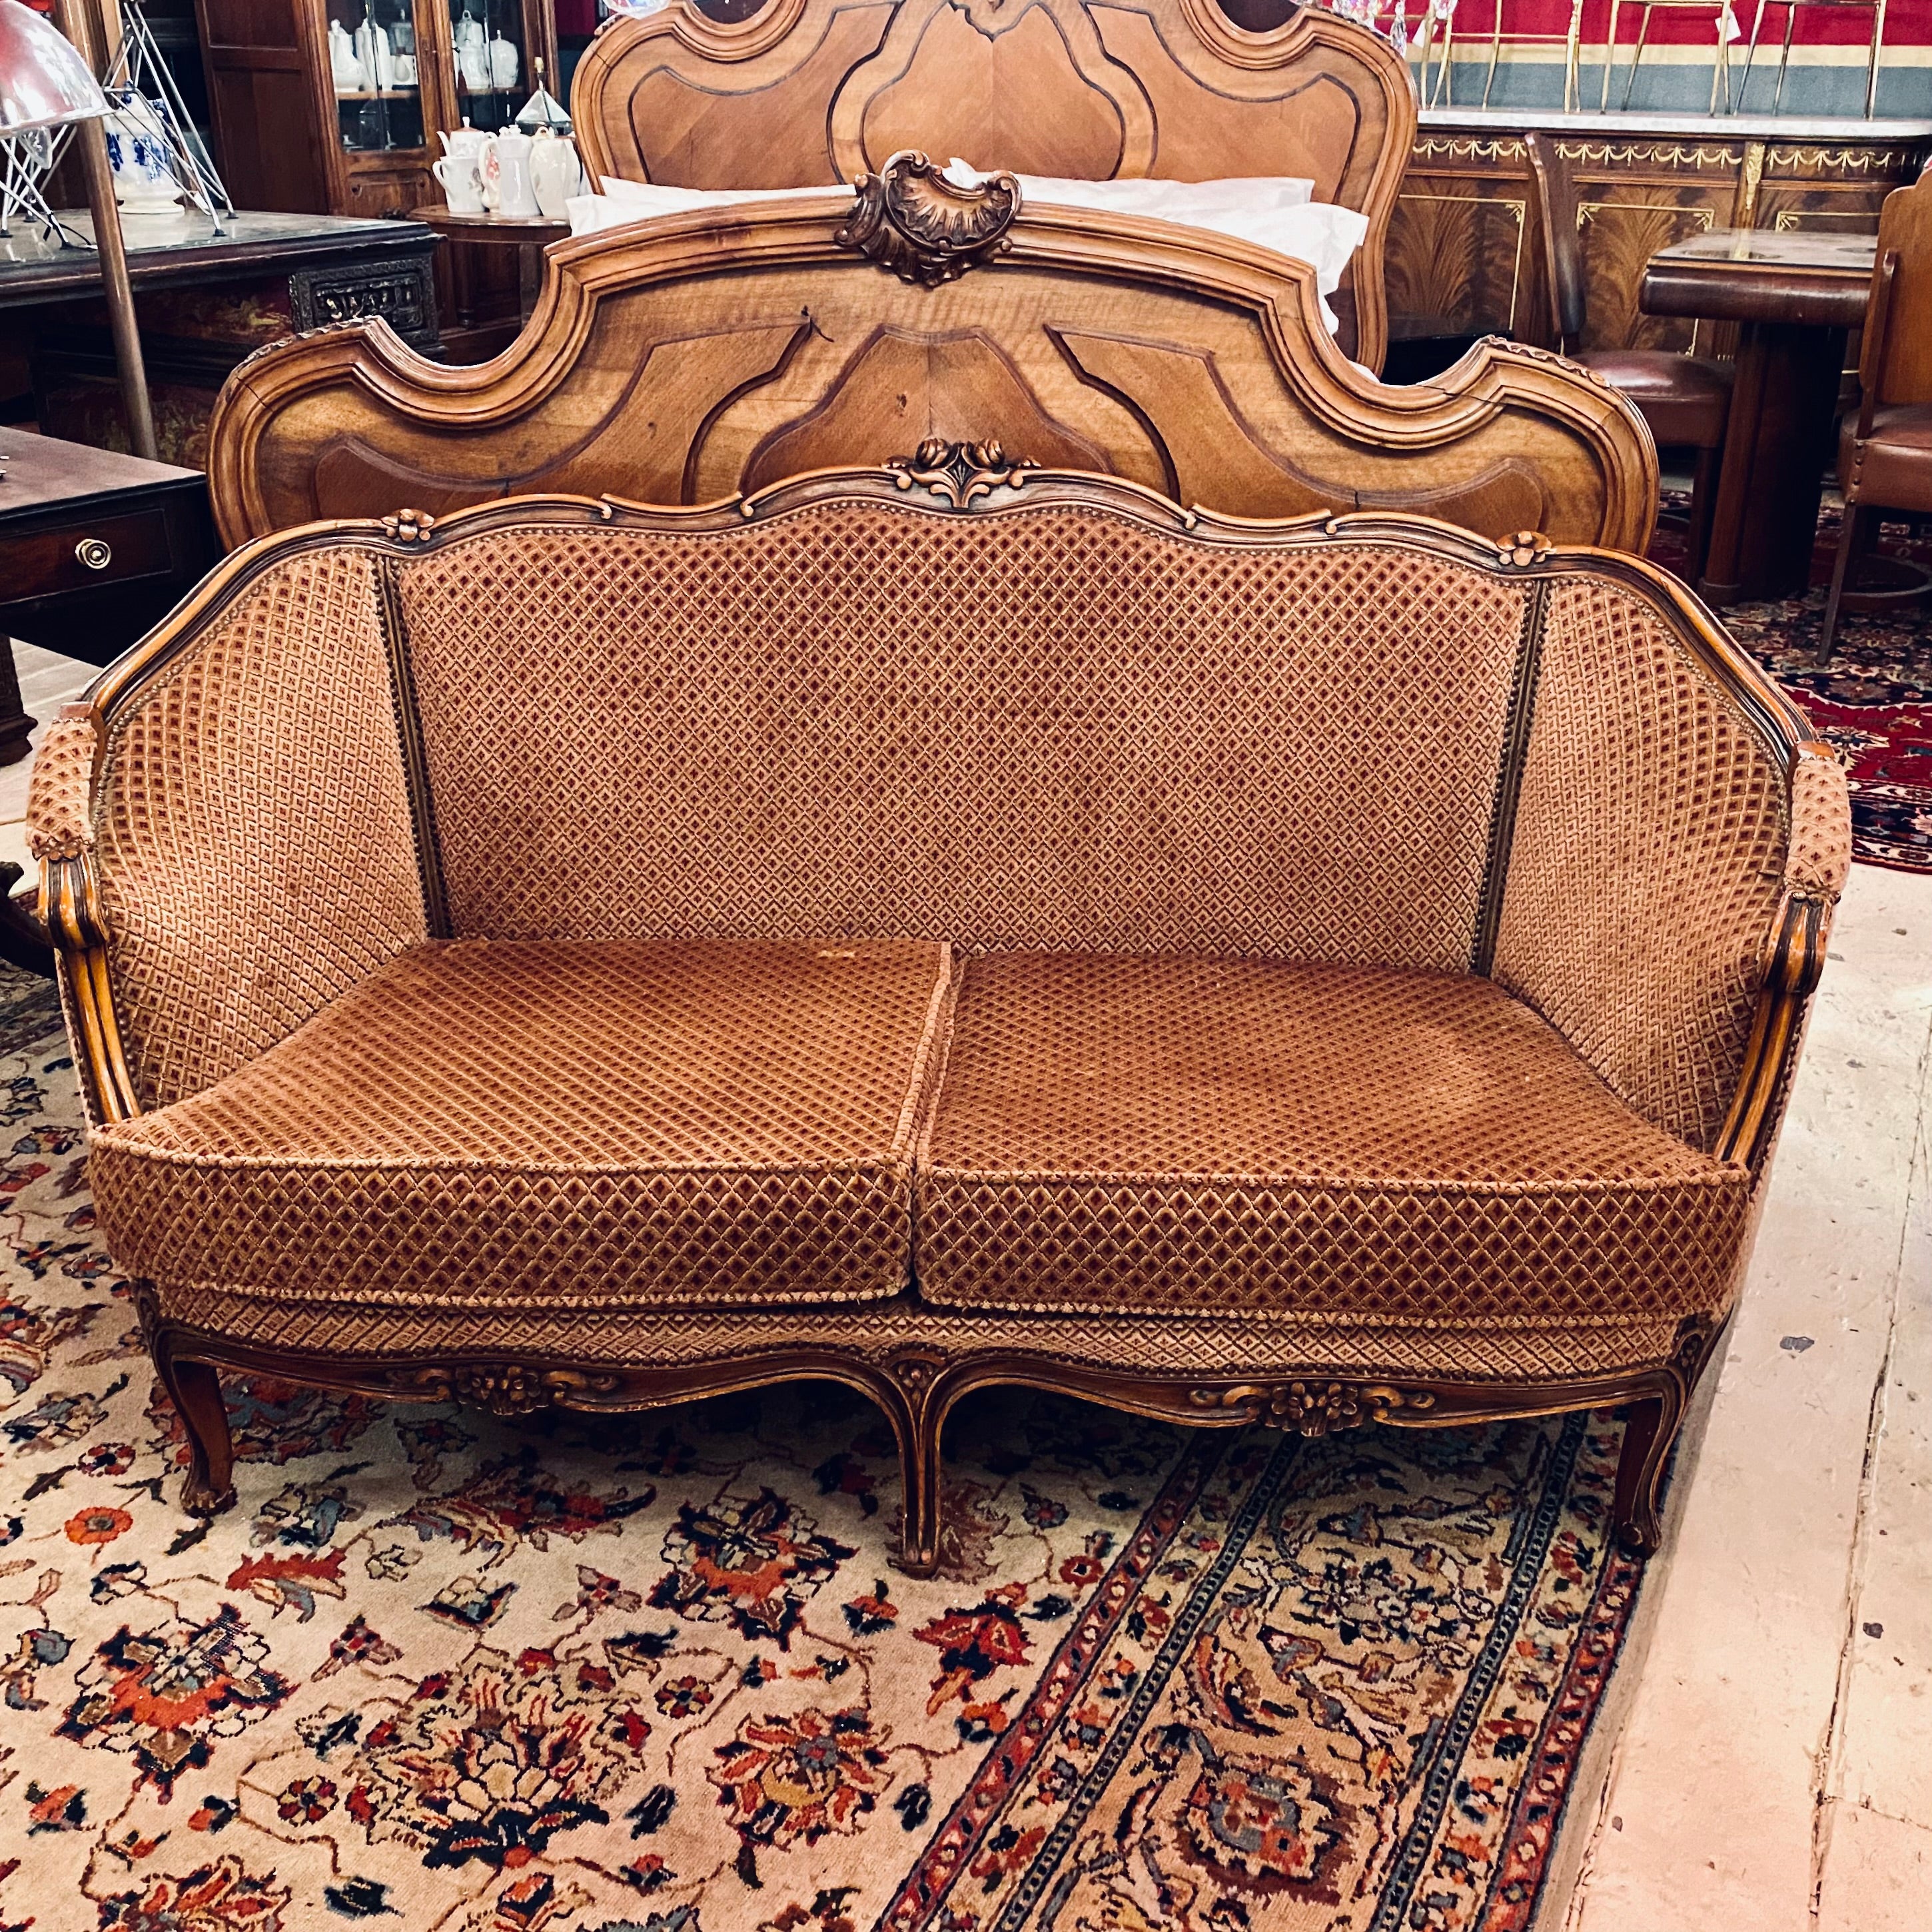 Antique French Sofa with Pink Upholstery